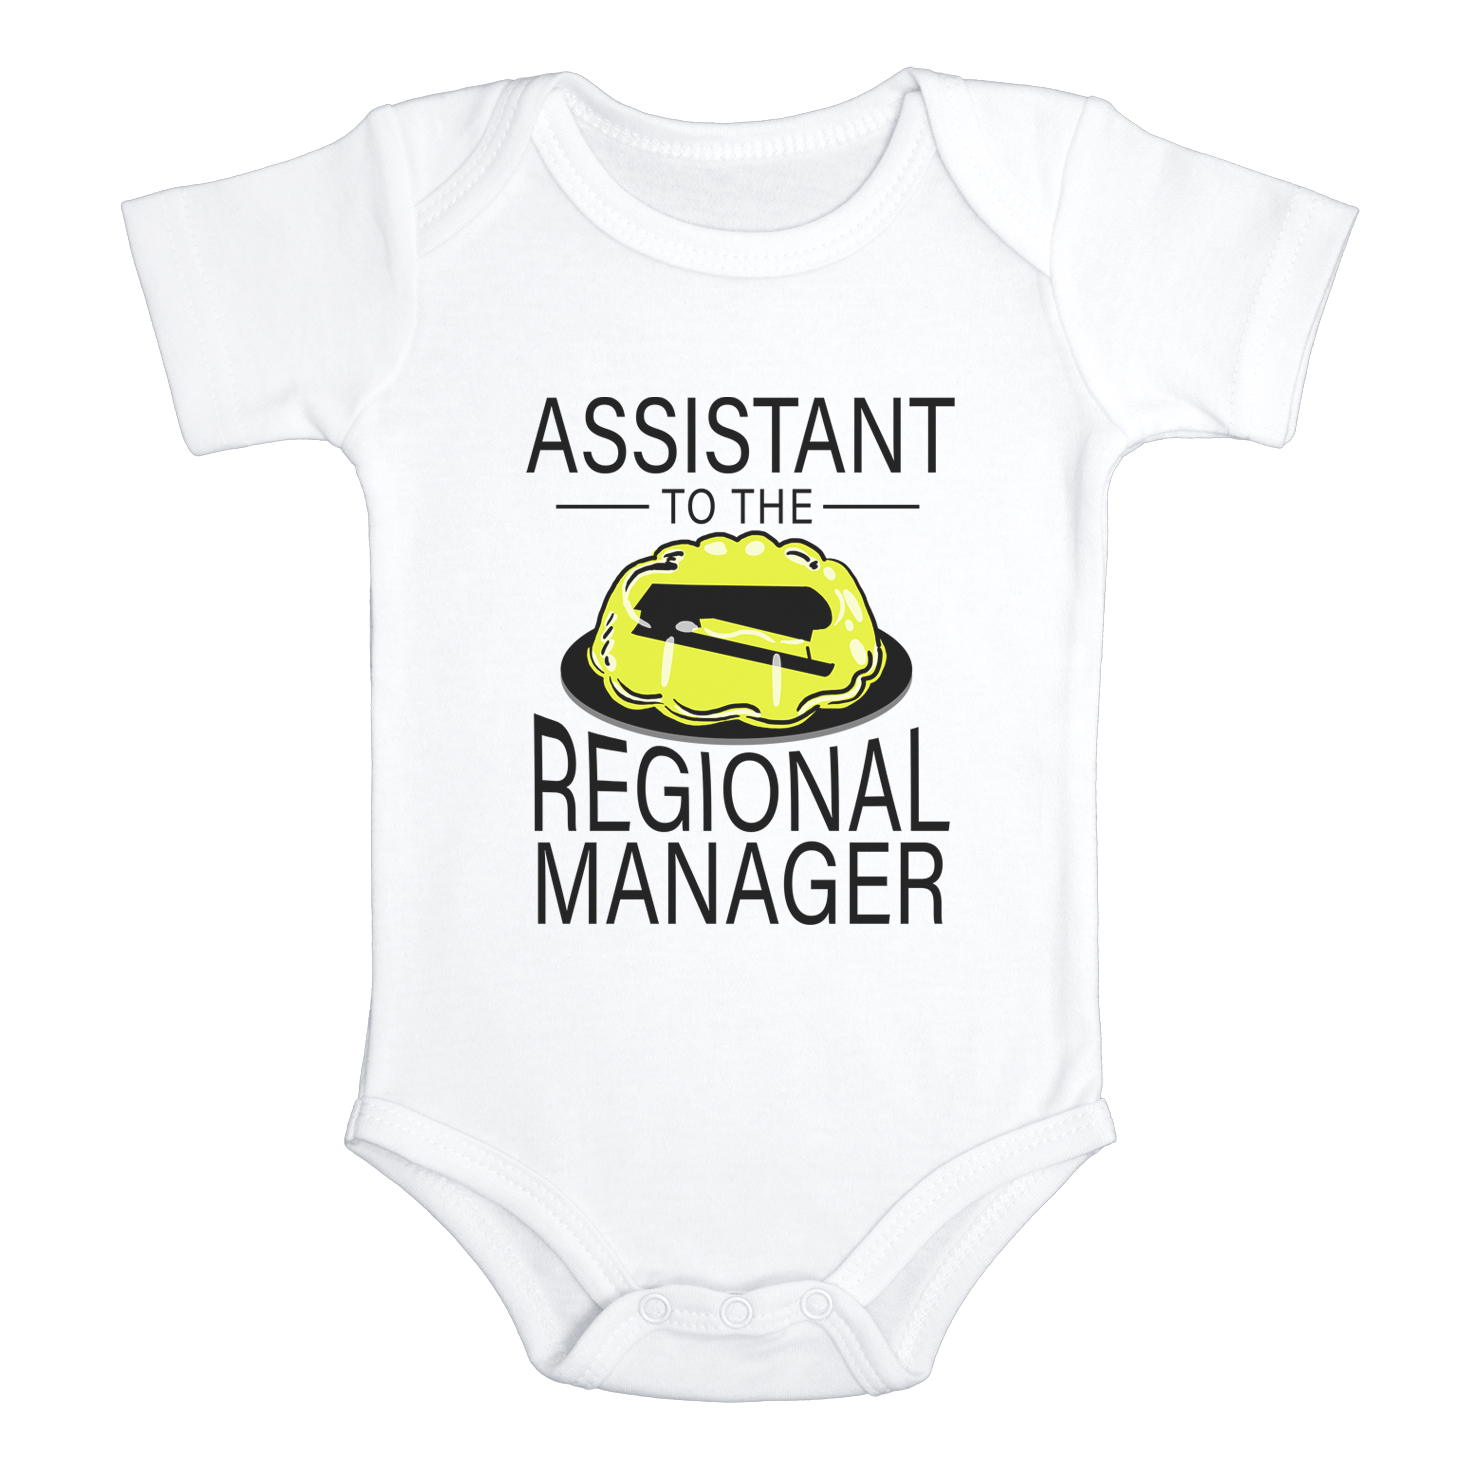 ASSISTANT TO THE REGIONAL MANAGER Funny baby onesies bodysuit (white: short or long sleeve) - HappyAddition